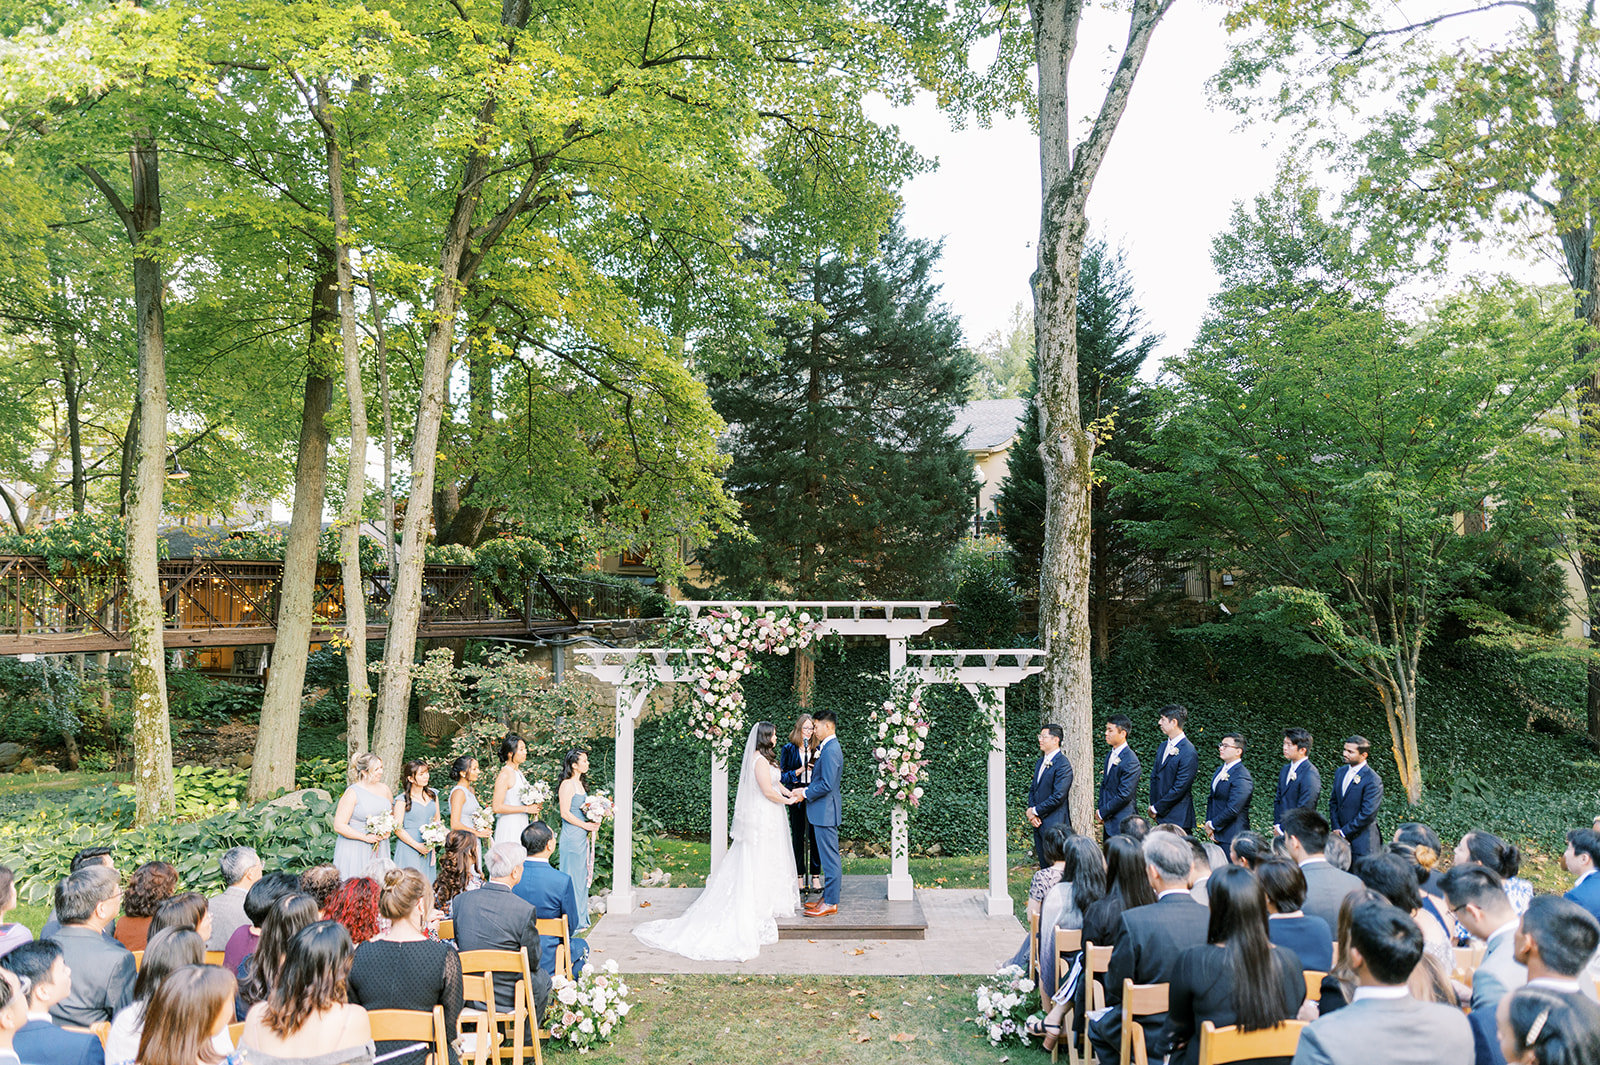 parisian inspired wedding ceremony on the lawn under tall trees at Pomme in Radnor, PA